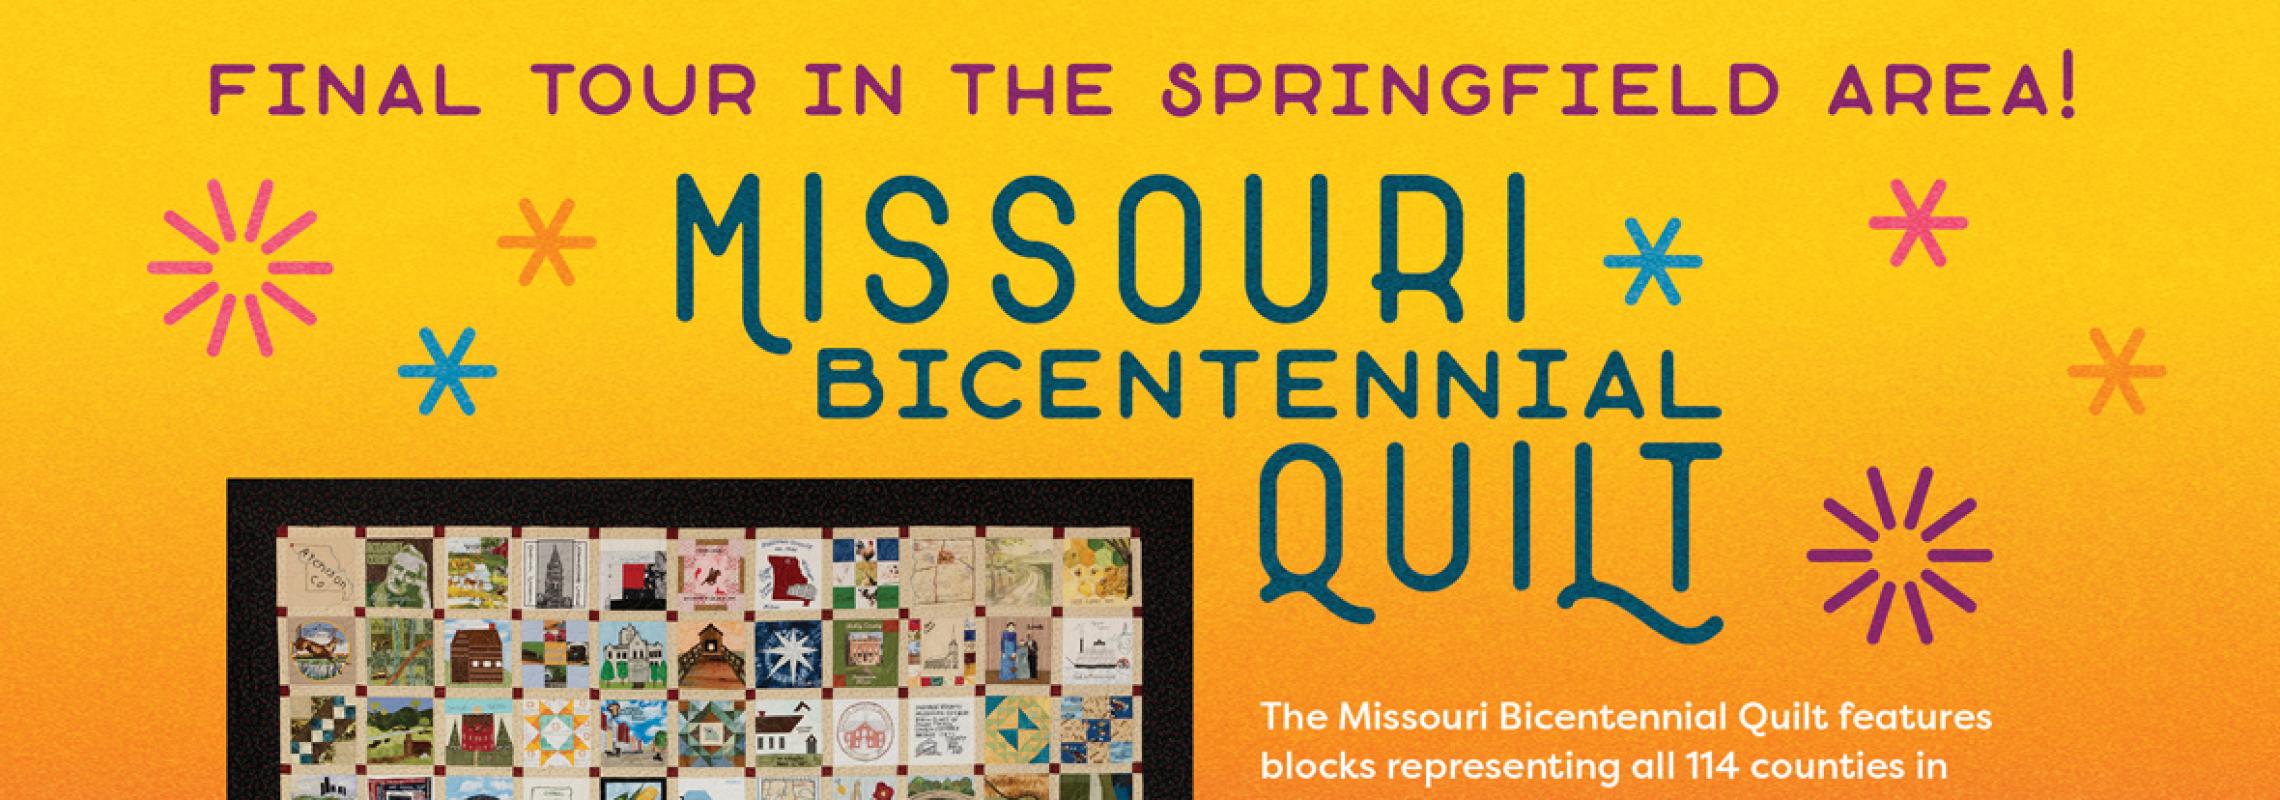 Missouri Bicentennial Quilt with info about reception and exhibit dates